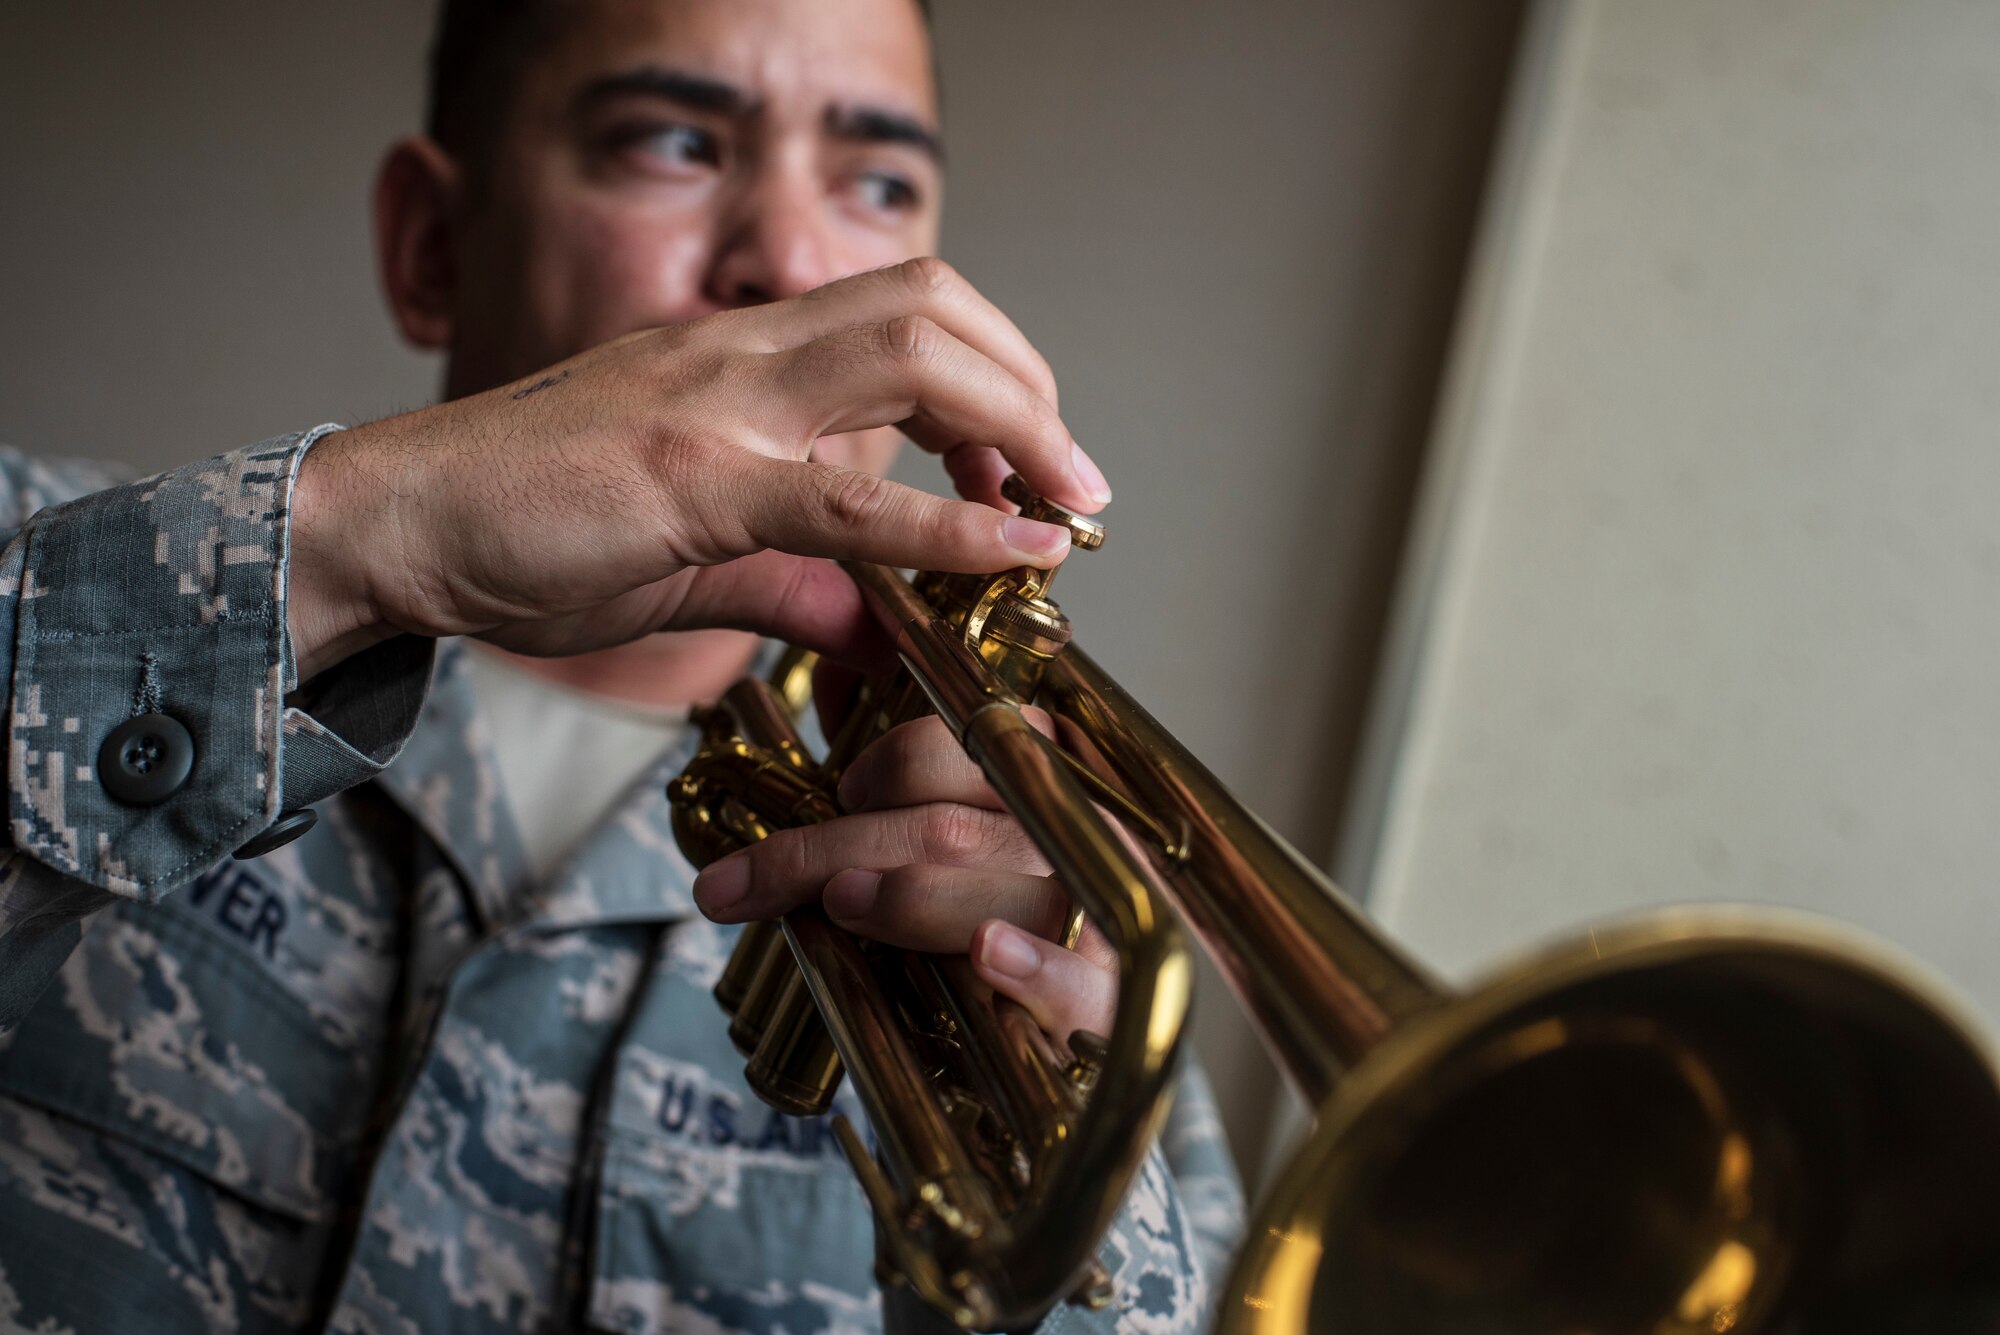 U.S. Air Force Capt. Charles Glover, the 35th Maintenance Squadron Operations officer, plays his trumpet in the Youth Center music room at Misawa Air Base, Japan, July 25, 2018. Glover is passionate about jazz music and plays in his spare time in order to relax. (U.S. Air Force photo by Airman 1st Class Collette Brooks)